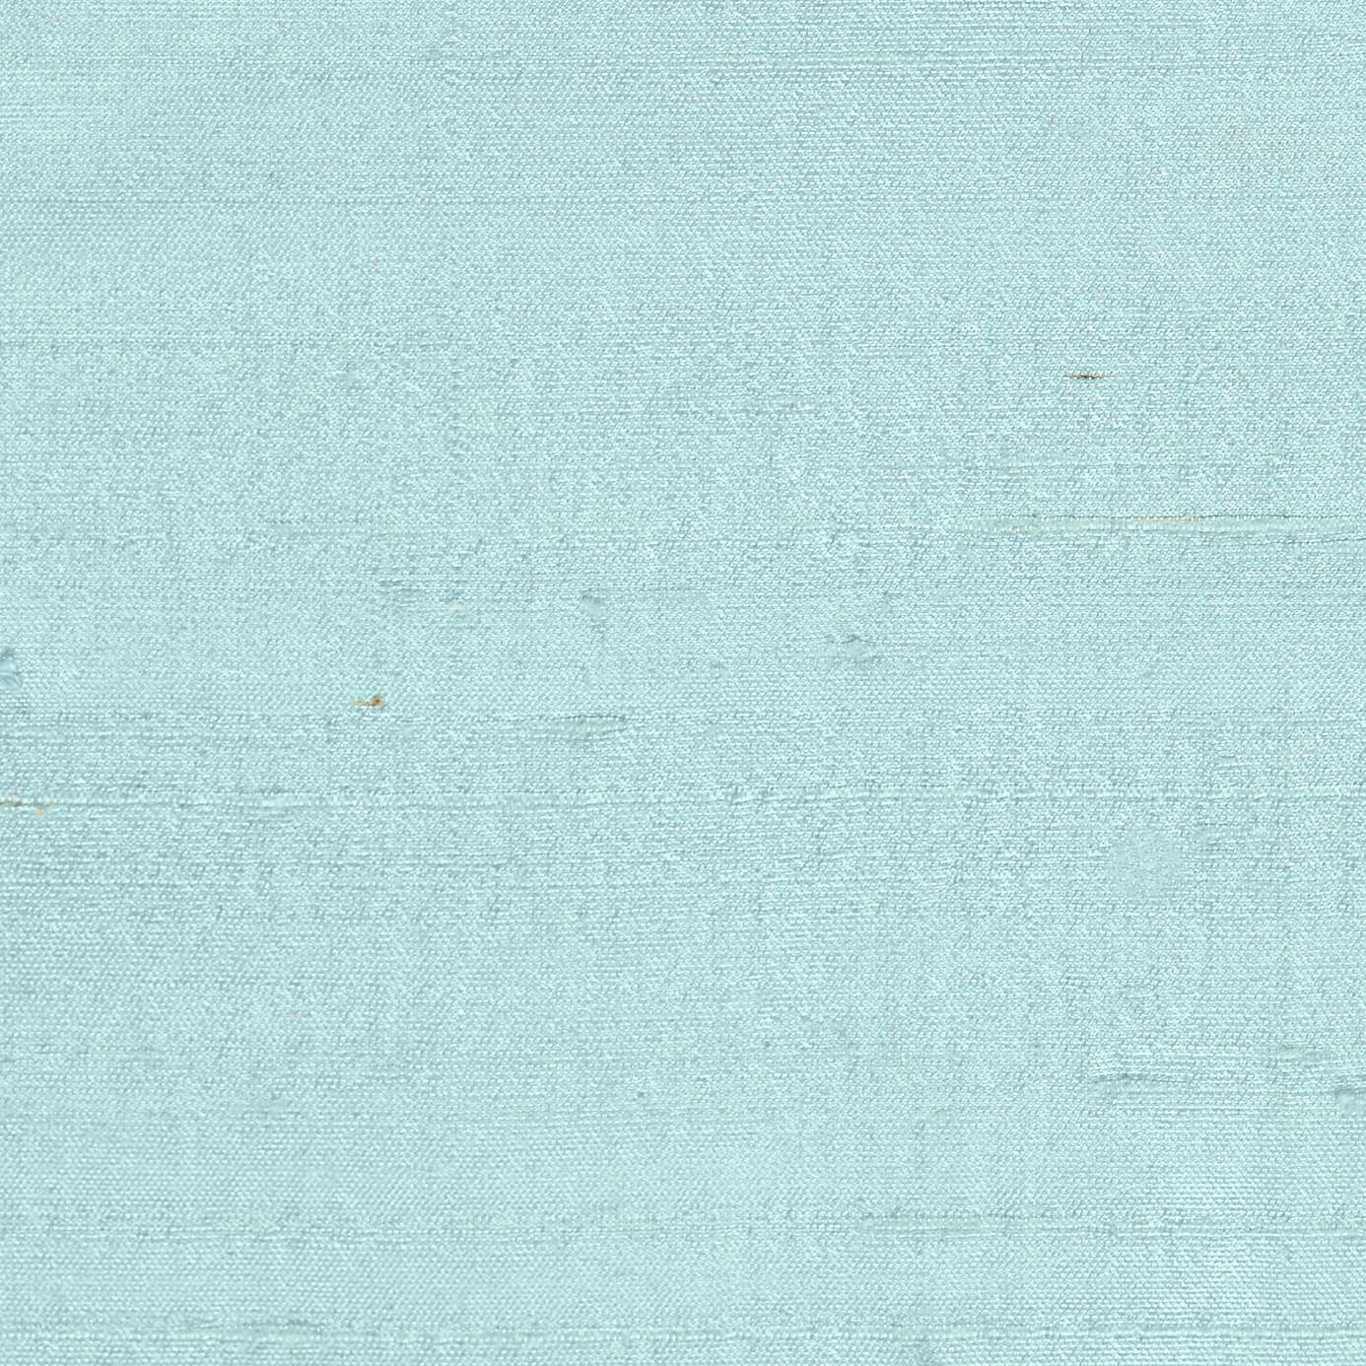 Laminar Frosted Lake Fabric by HAR